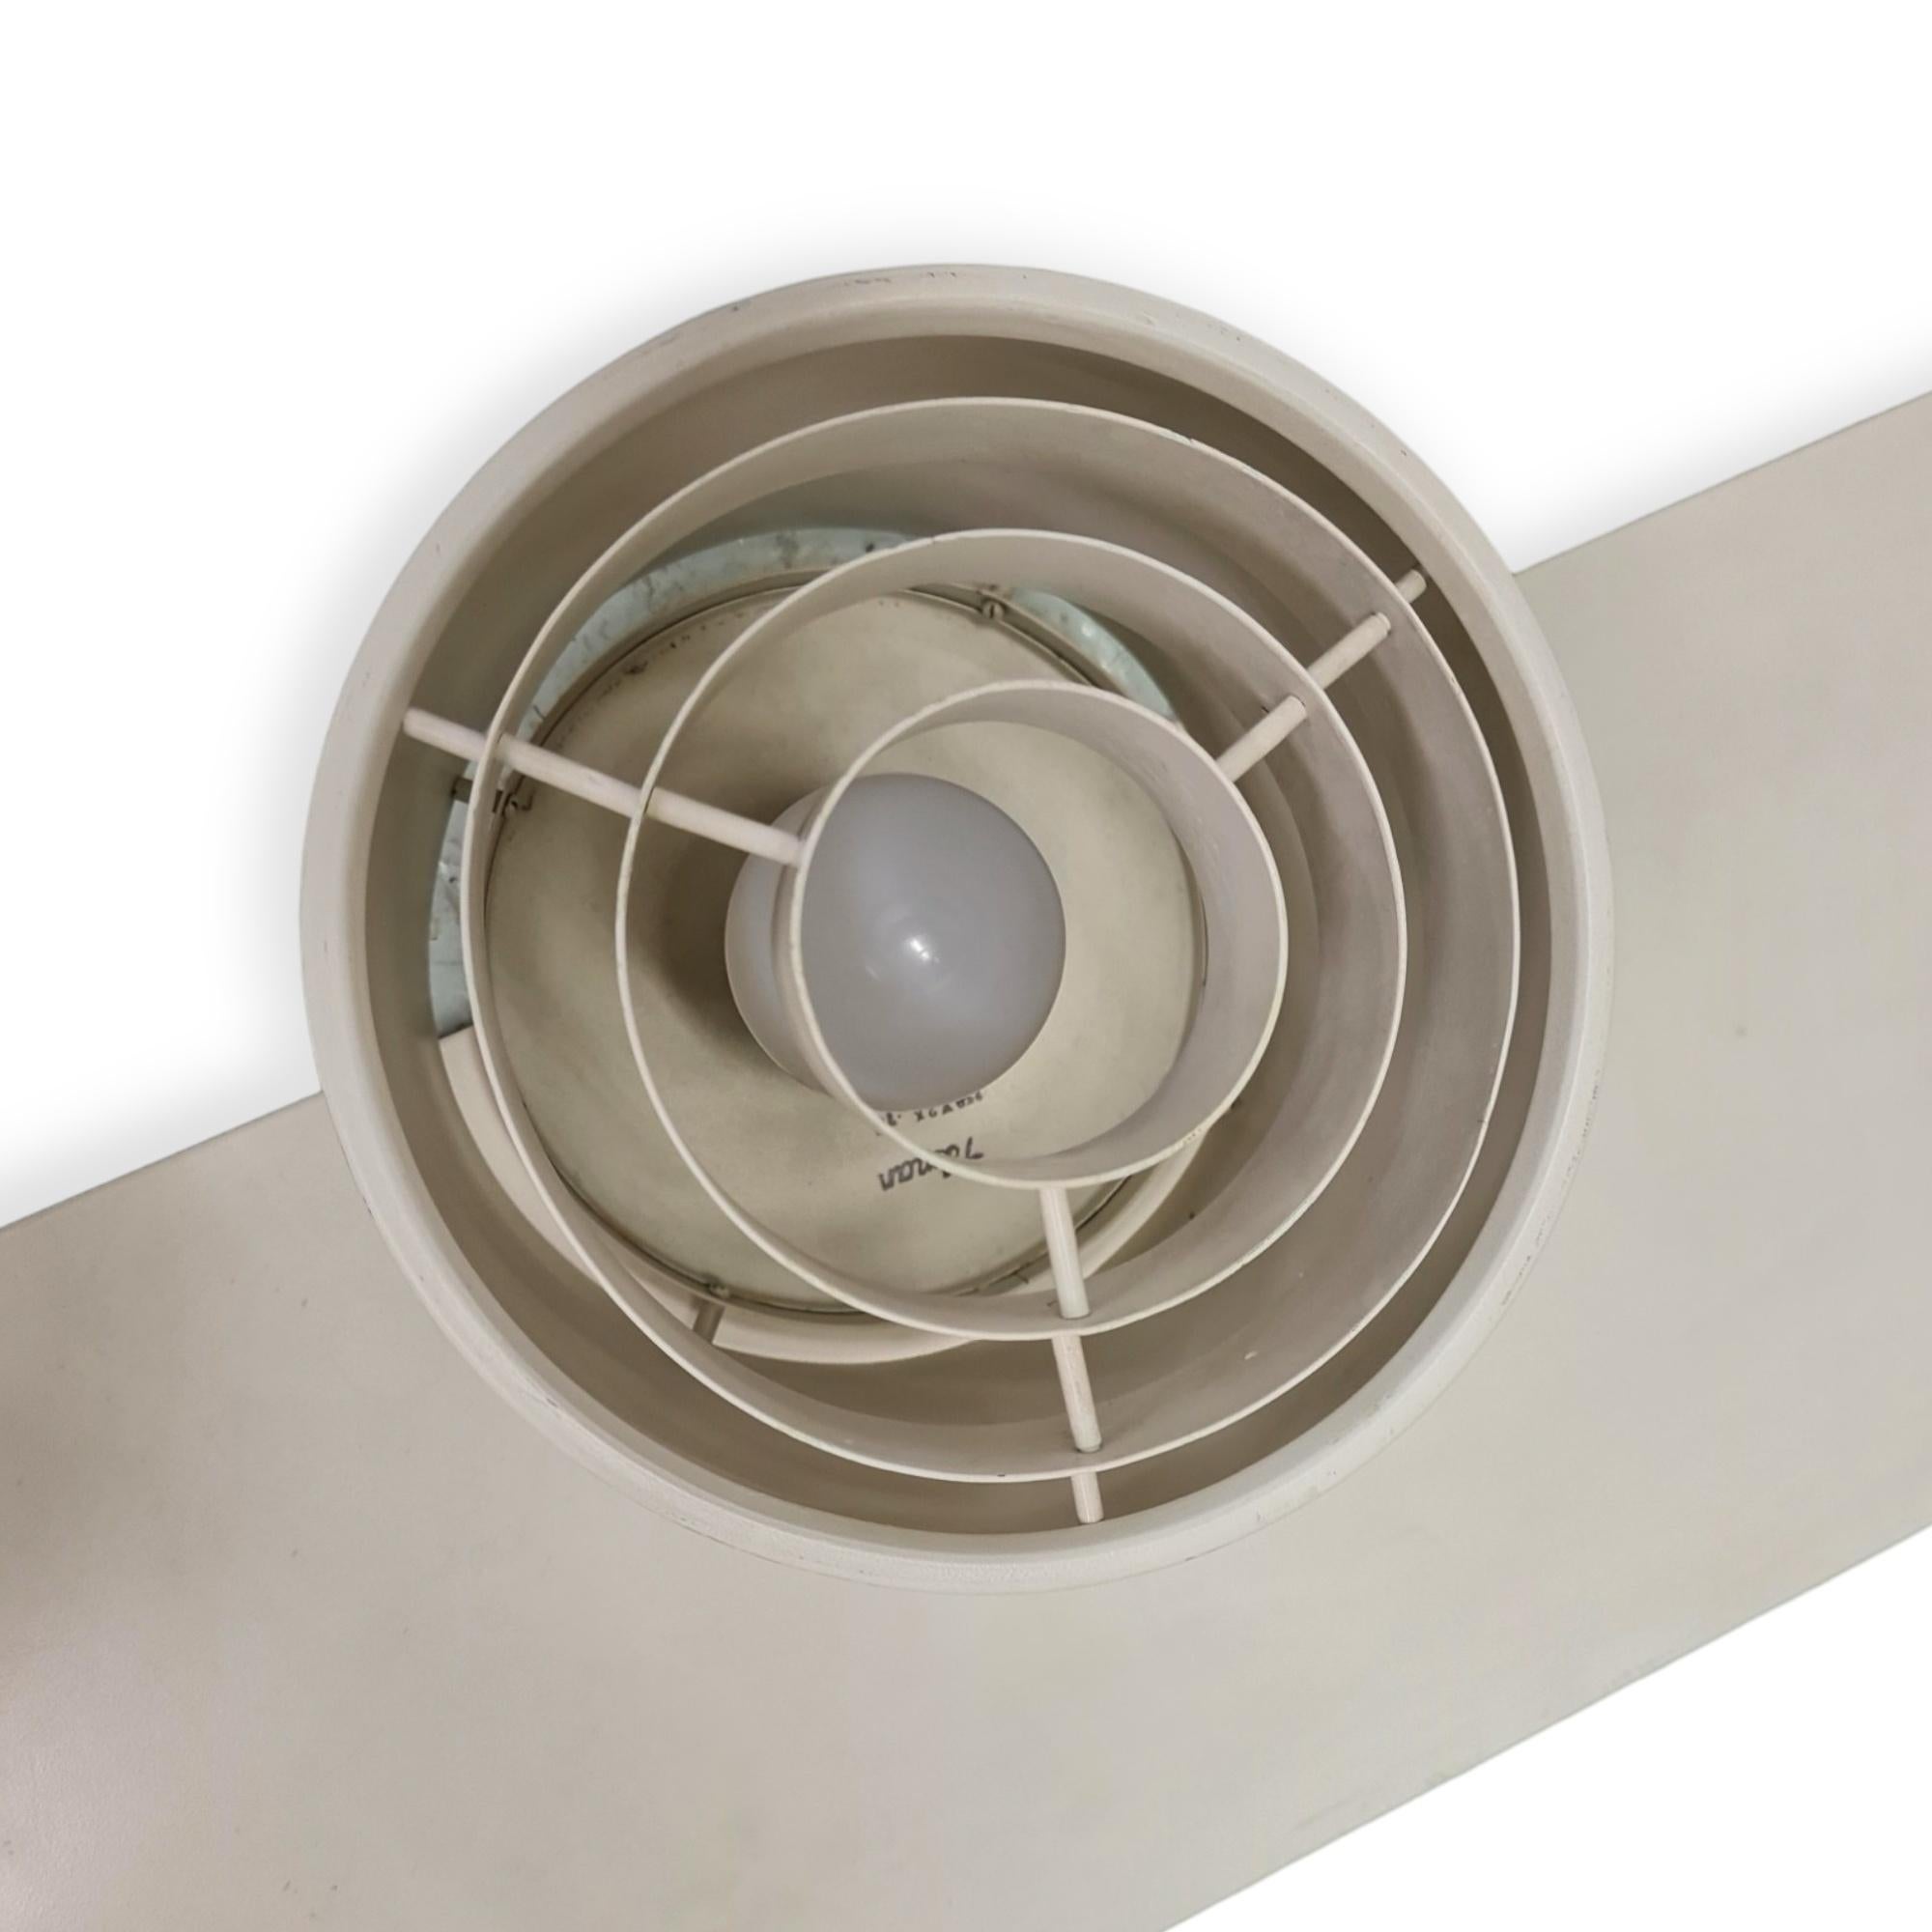 Alvar Aalto Ceiling Lamp for Stora Enso Headquarters, Idman In Good Condition For Sale In Helsinki, FI